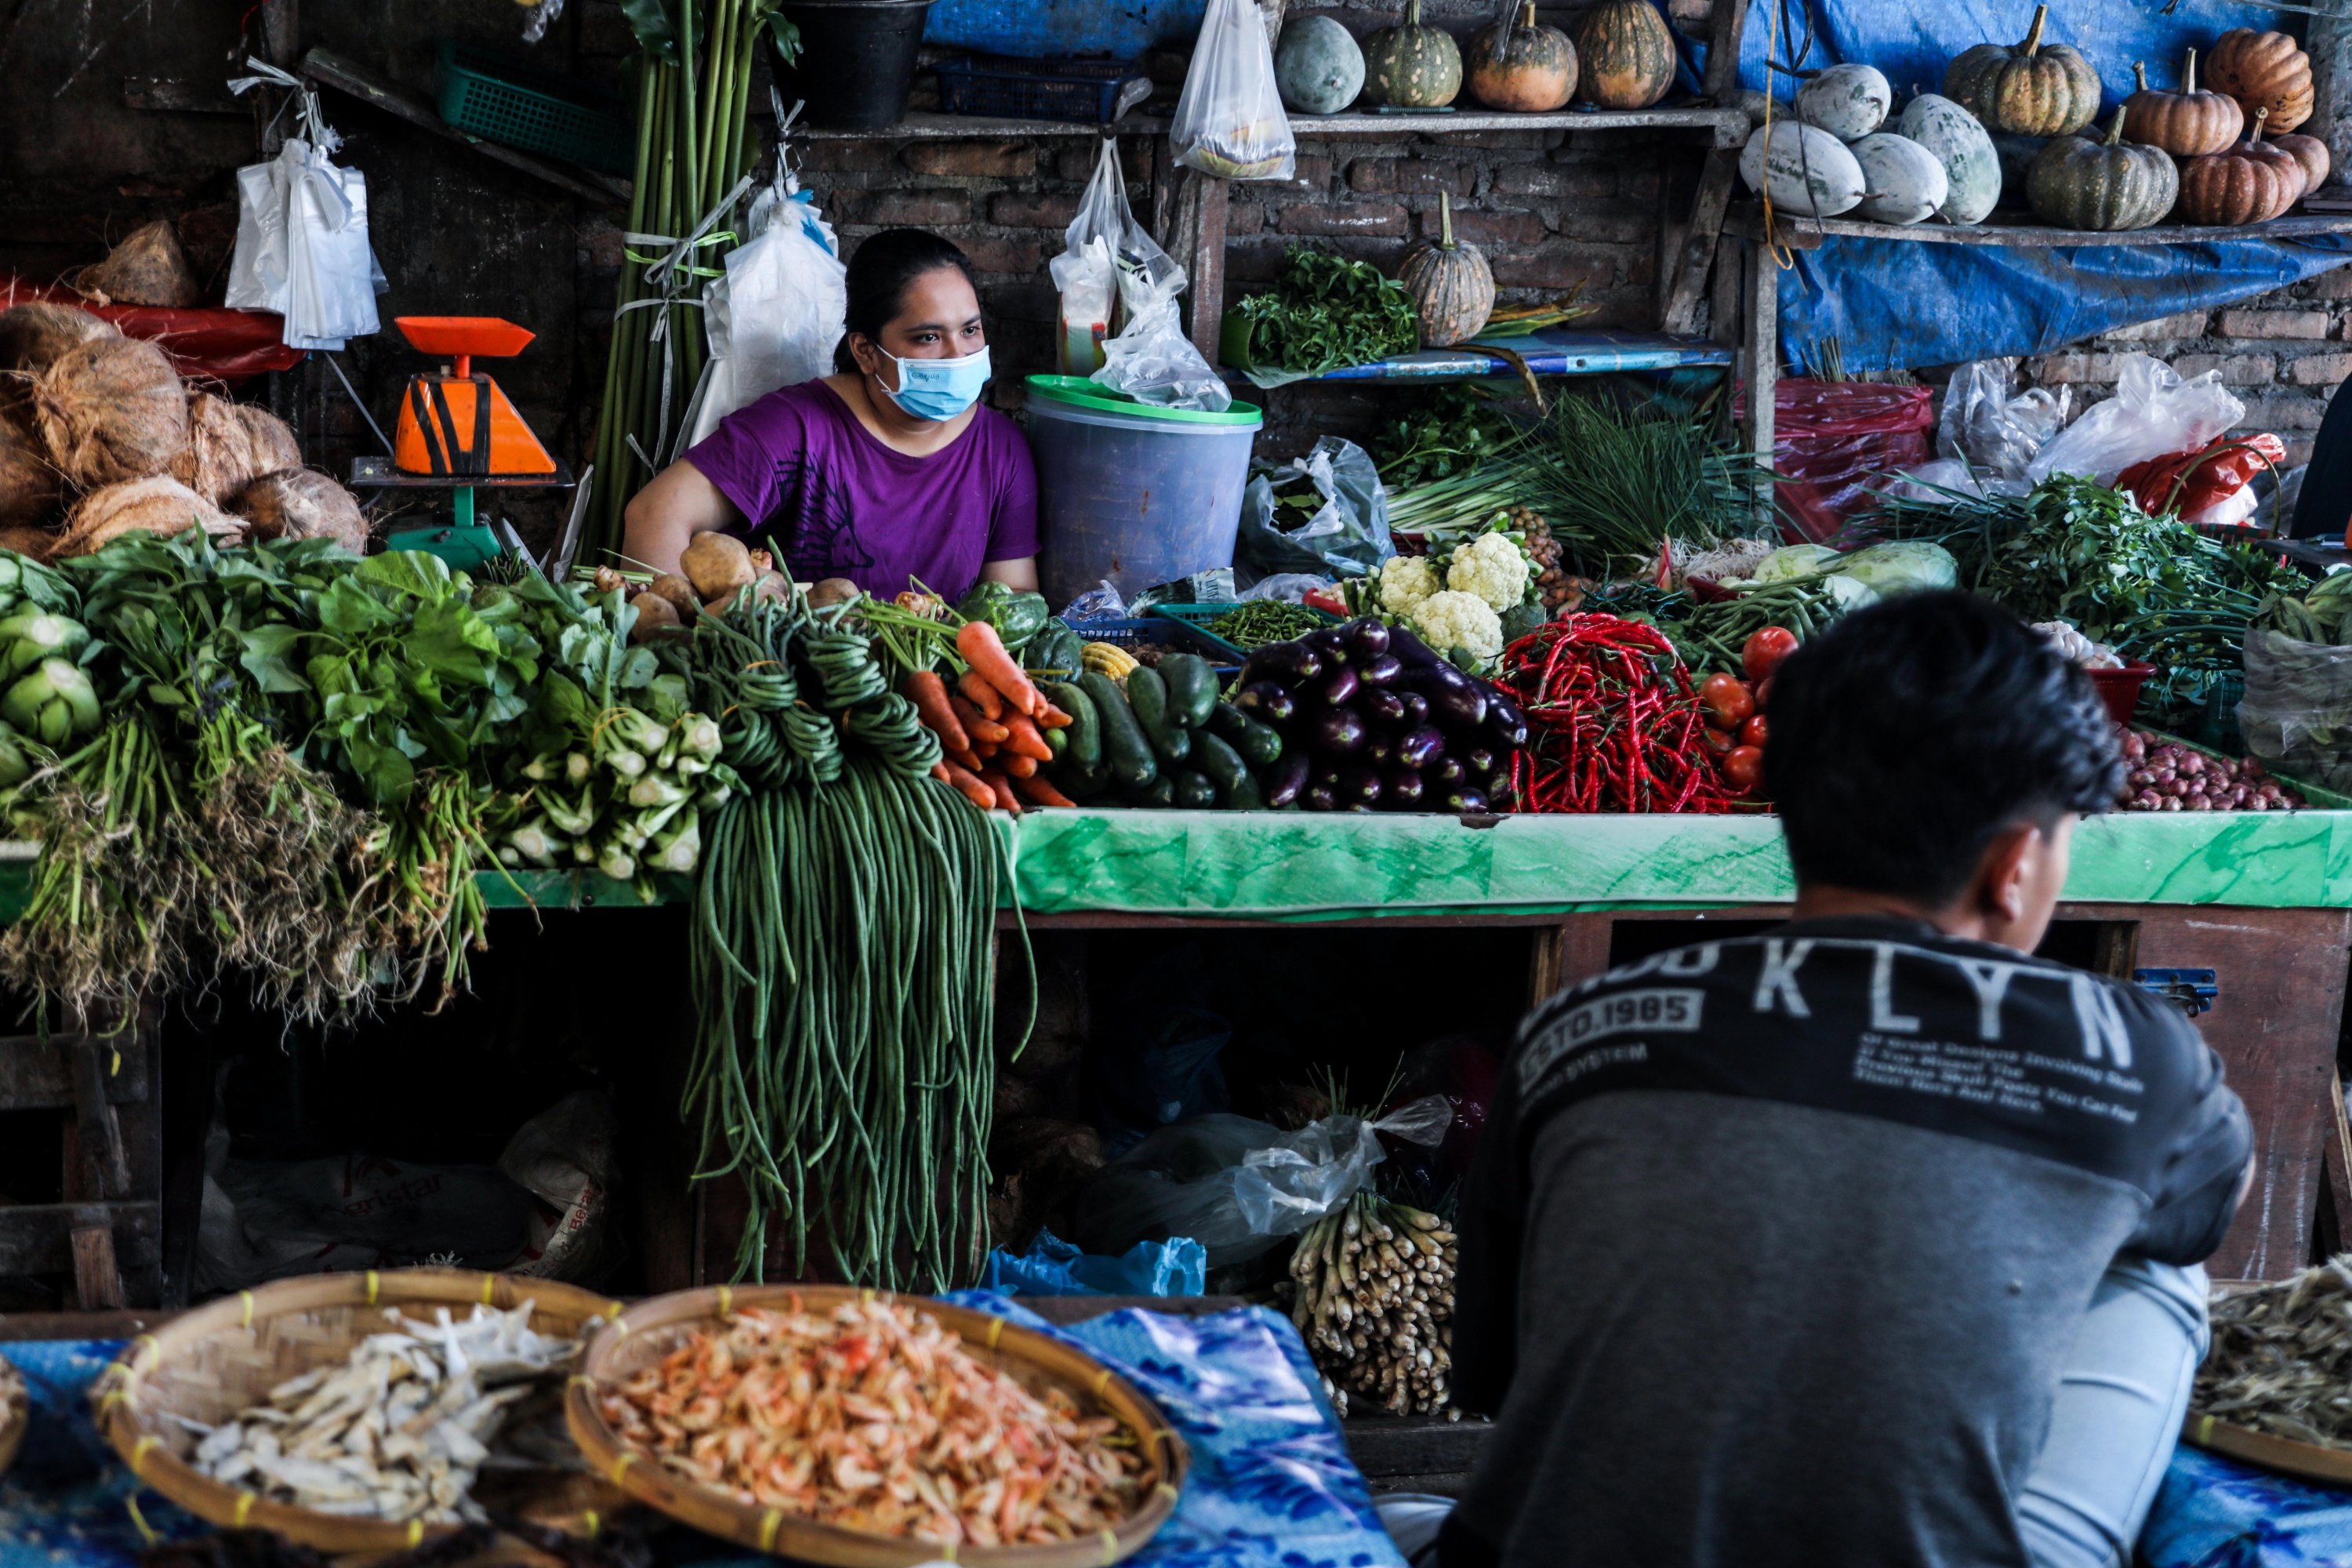 Vegetable vendors wait for customers at a market in Medan, North Sumatra, Indonesia, Feb 2, 2021 (Photo: AFP)